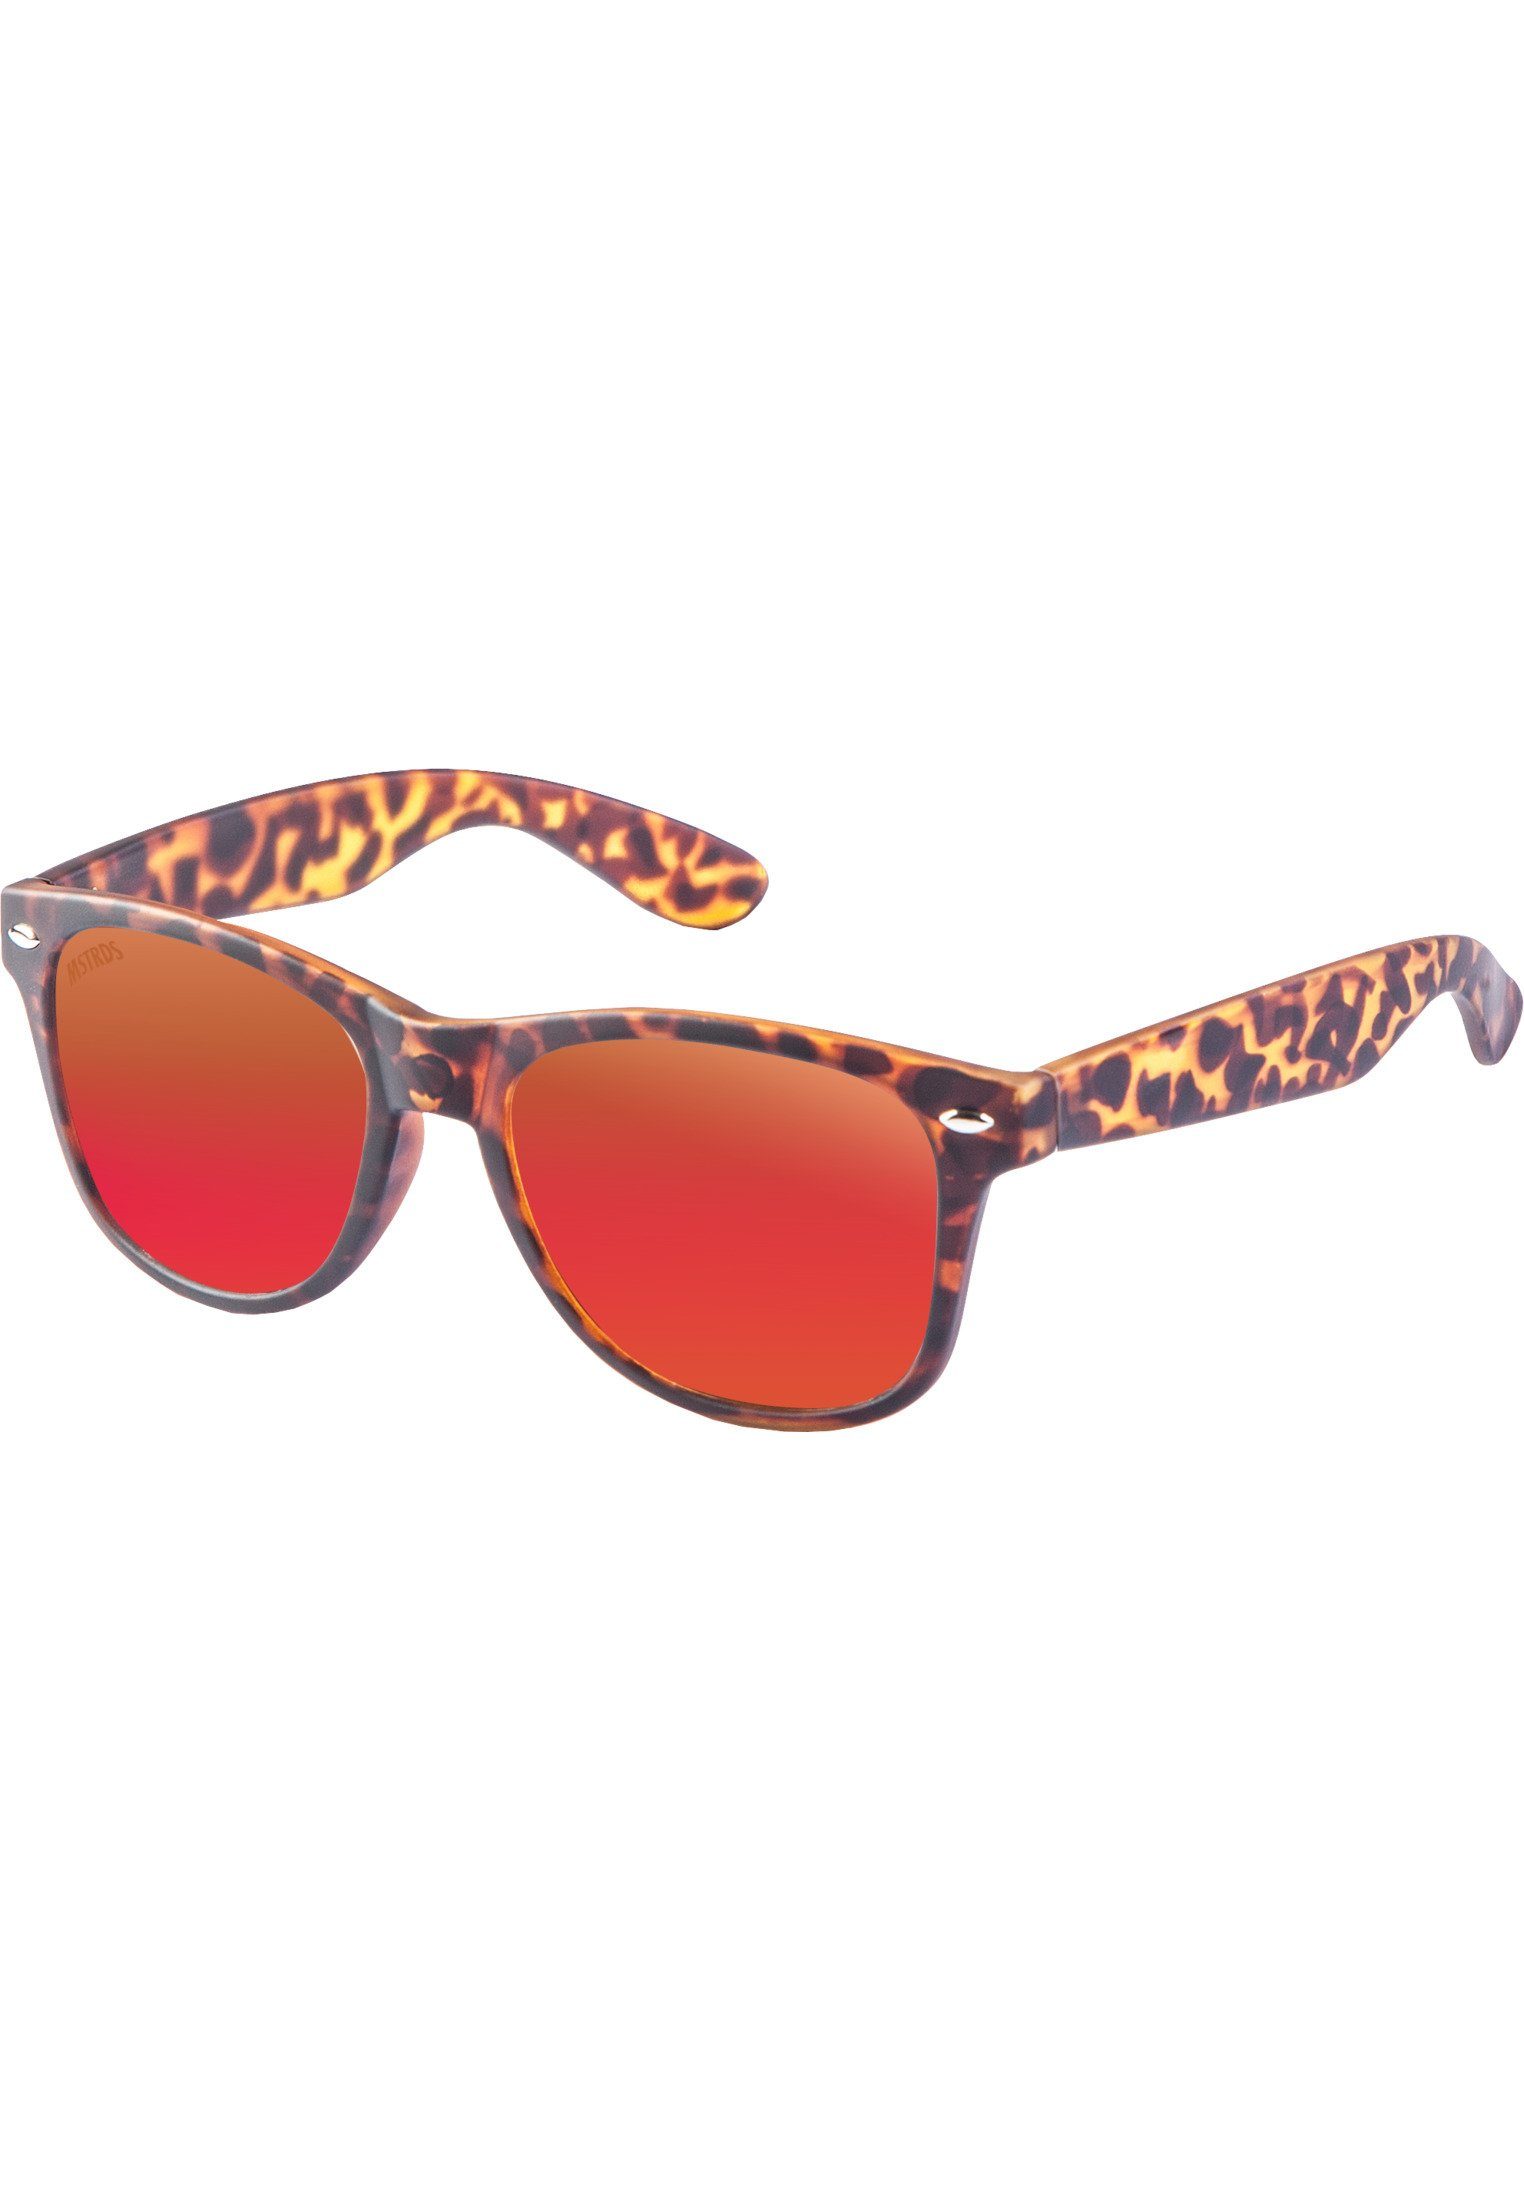 havanna/red Accessoires Sonnenbrille MSTRDS Sunglasses Likoma Youth